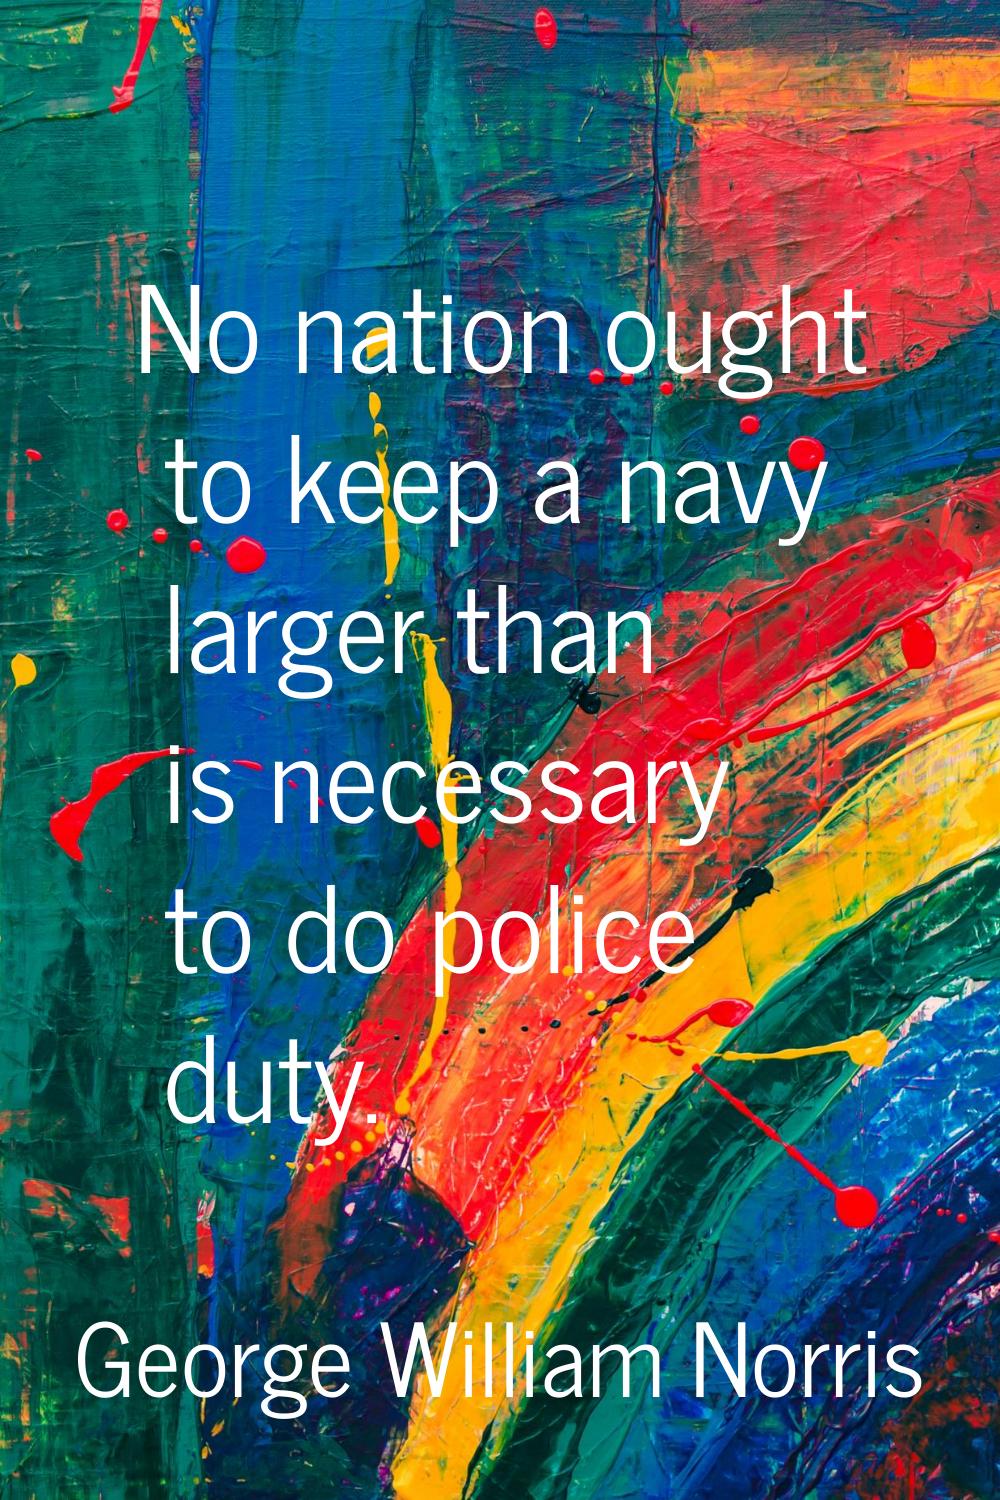 No nation ought to keep a navy larger than is necessary to do police duty.